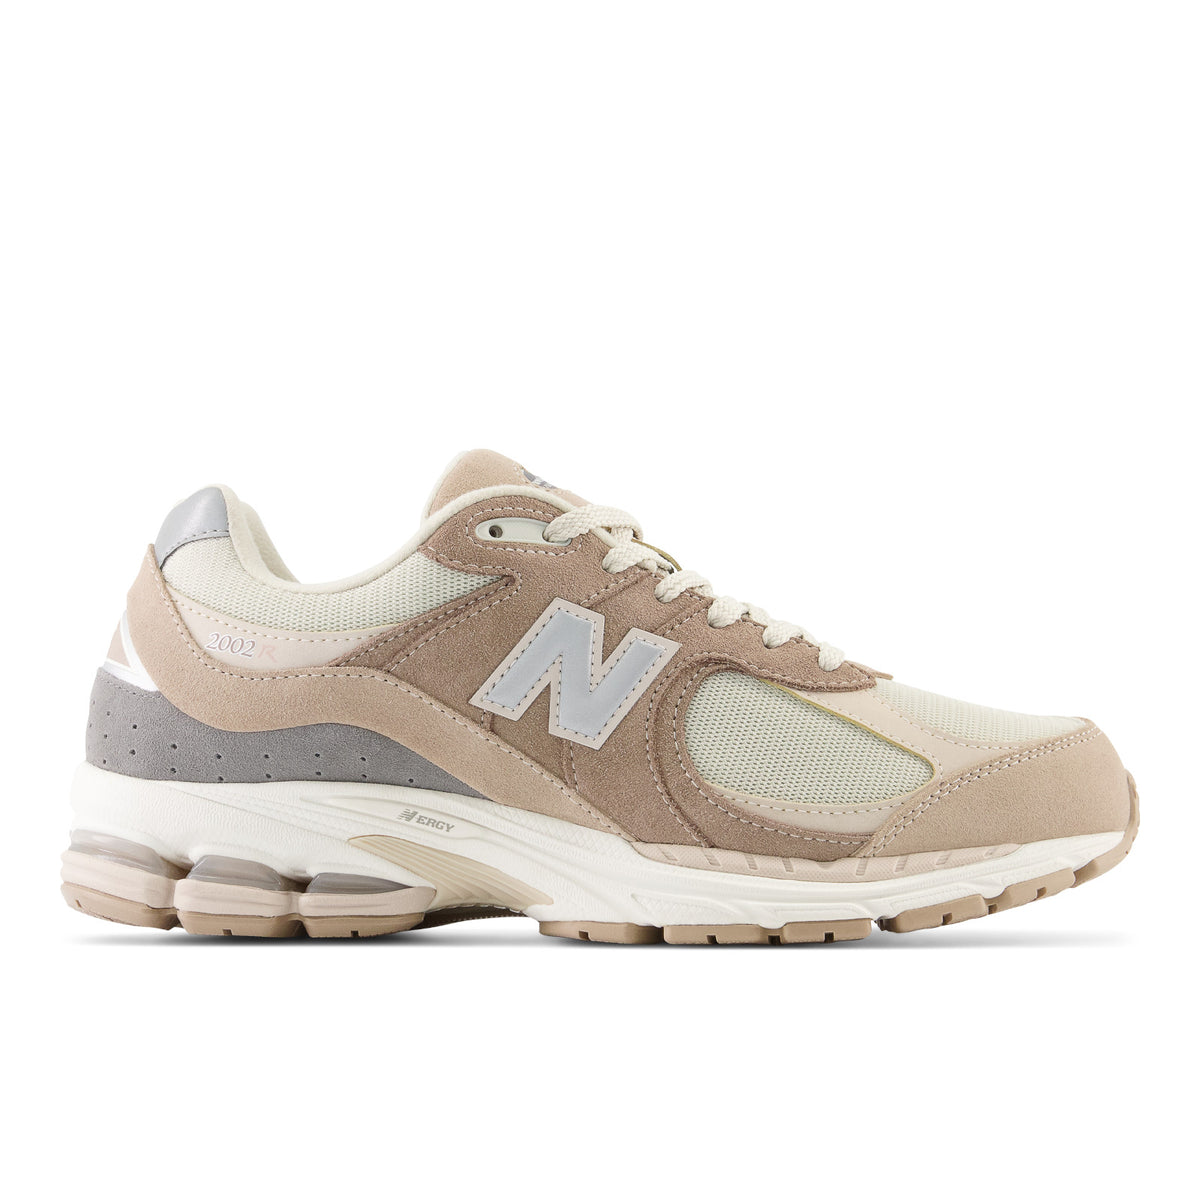 Load image into Gallery viewer, New Balance Driftwood/White 2002 Trainer
